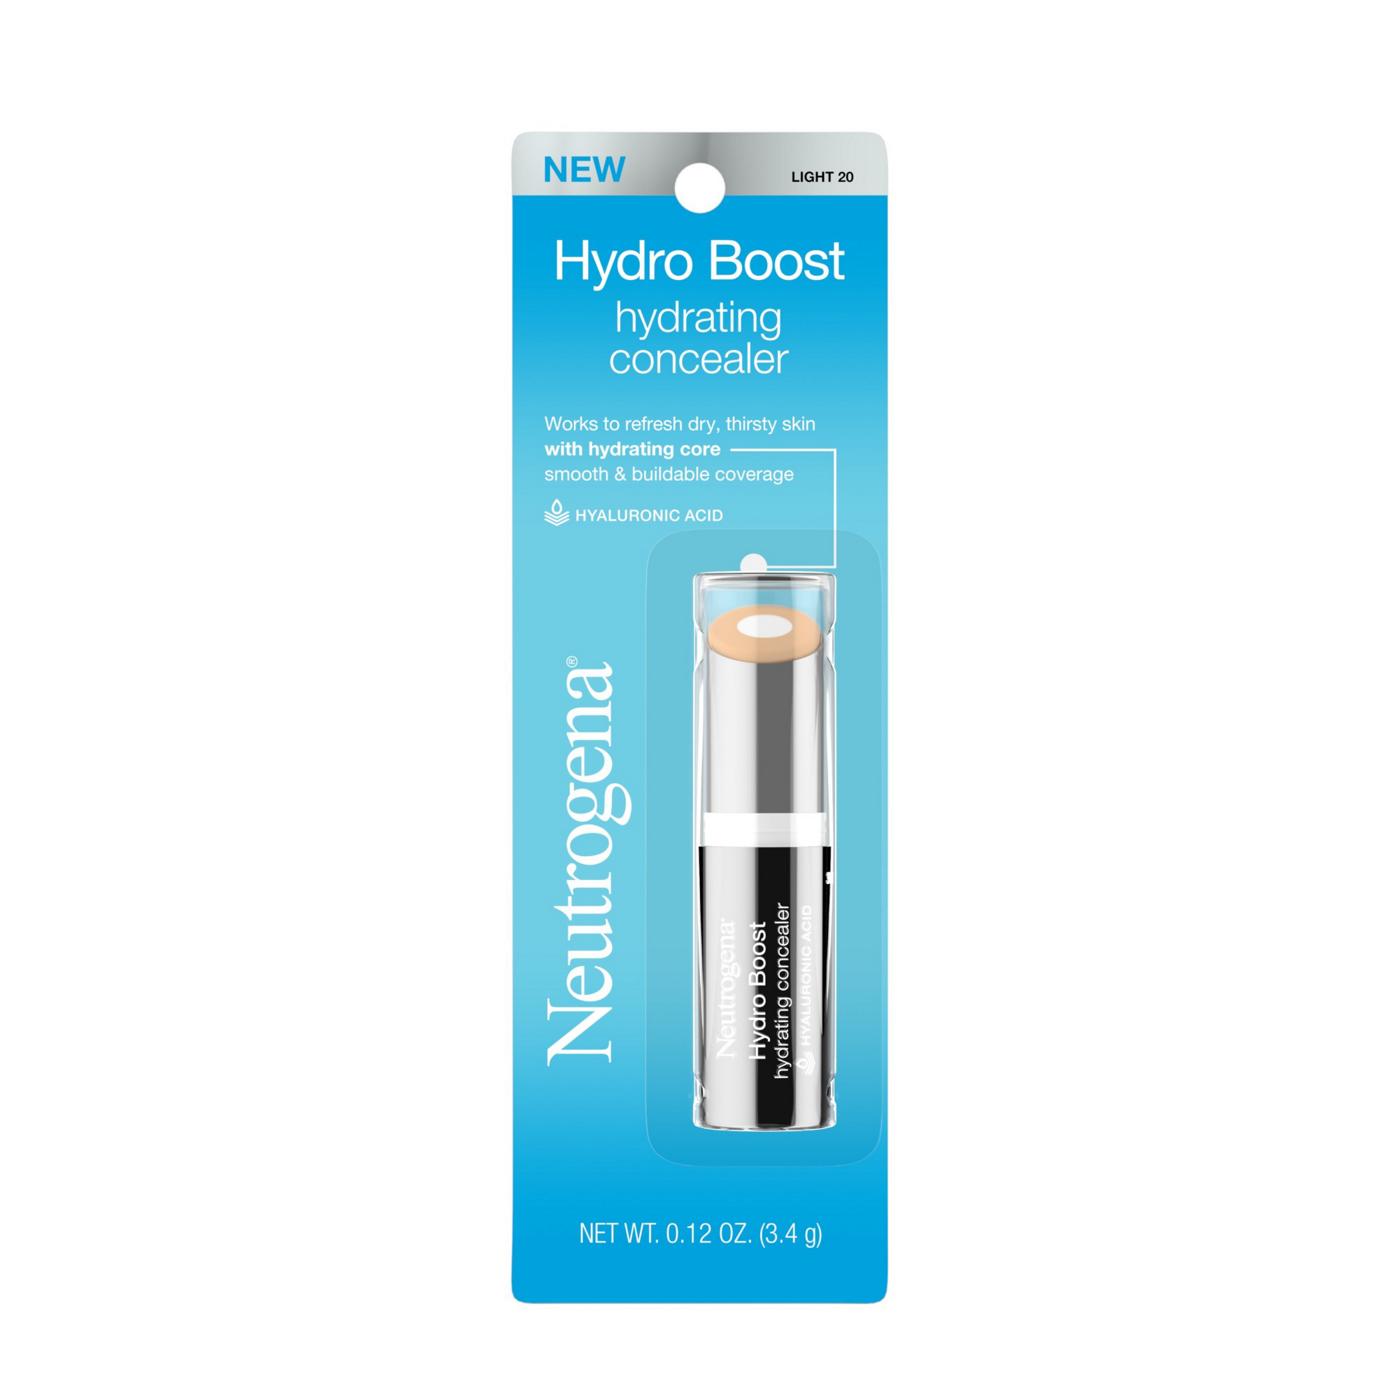 Neutrogena Hydro Boost Hydrating Concealer 20 Light; image 1 of 7